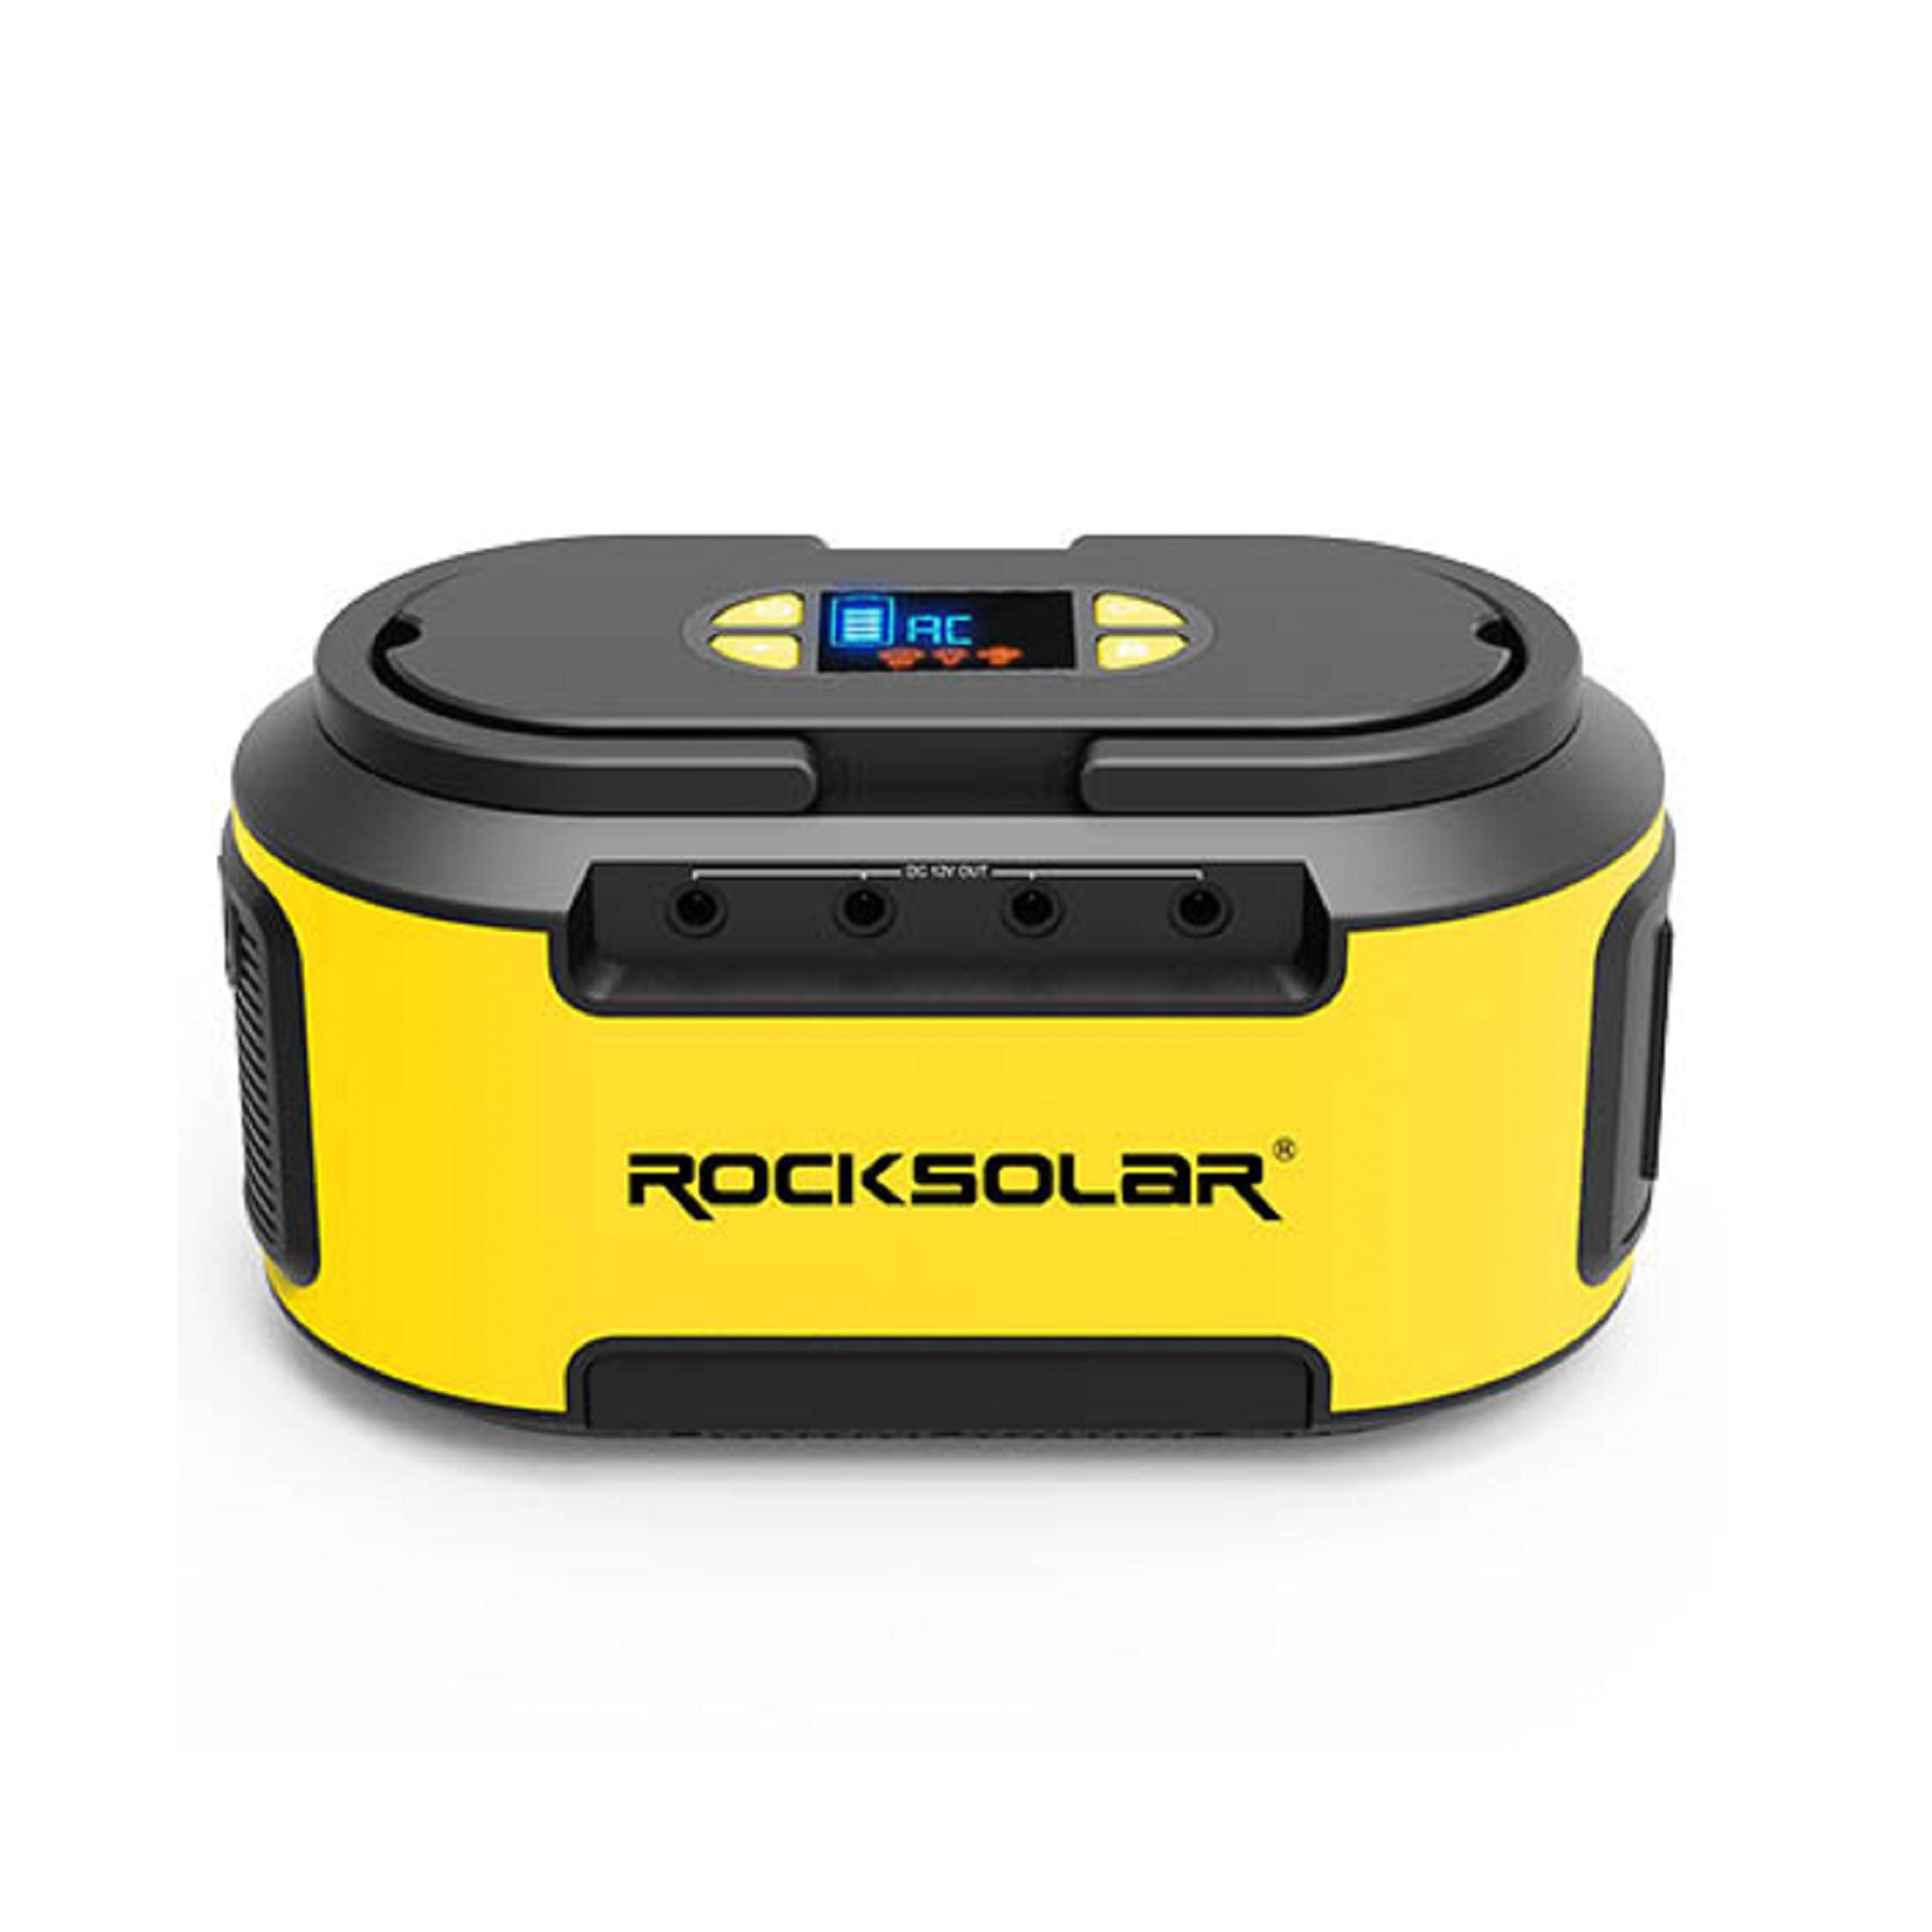 ROCKSOLAR Portable Power Station with Dual LED Flashlight, 222Wh Lithium  Battery, 200W AC, USB, and DC Output